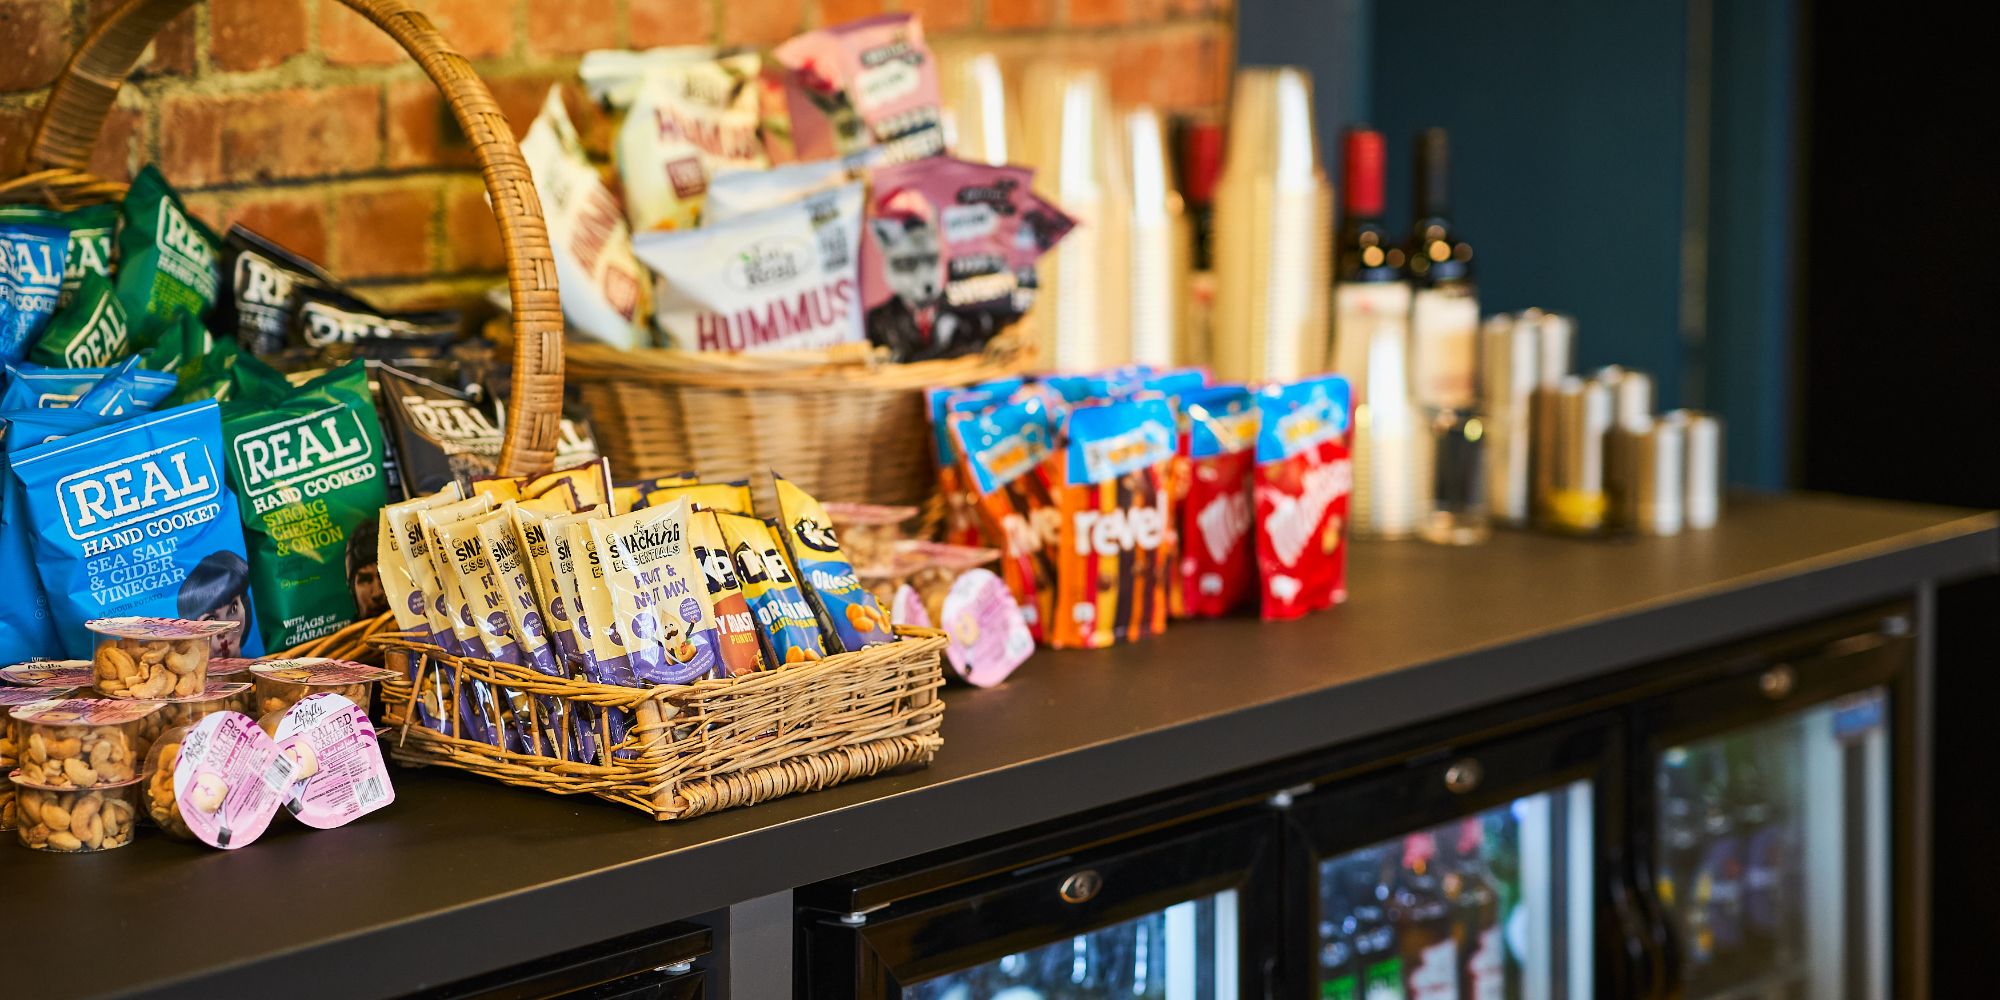 An image of a counter decorated with a variety of different chocolates, nuts and crips as well as cups on the right hand side of the image and fridges below the counter.